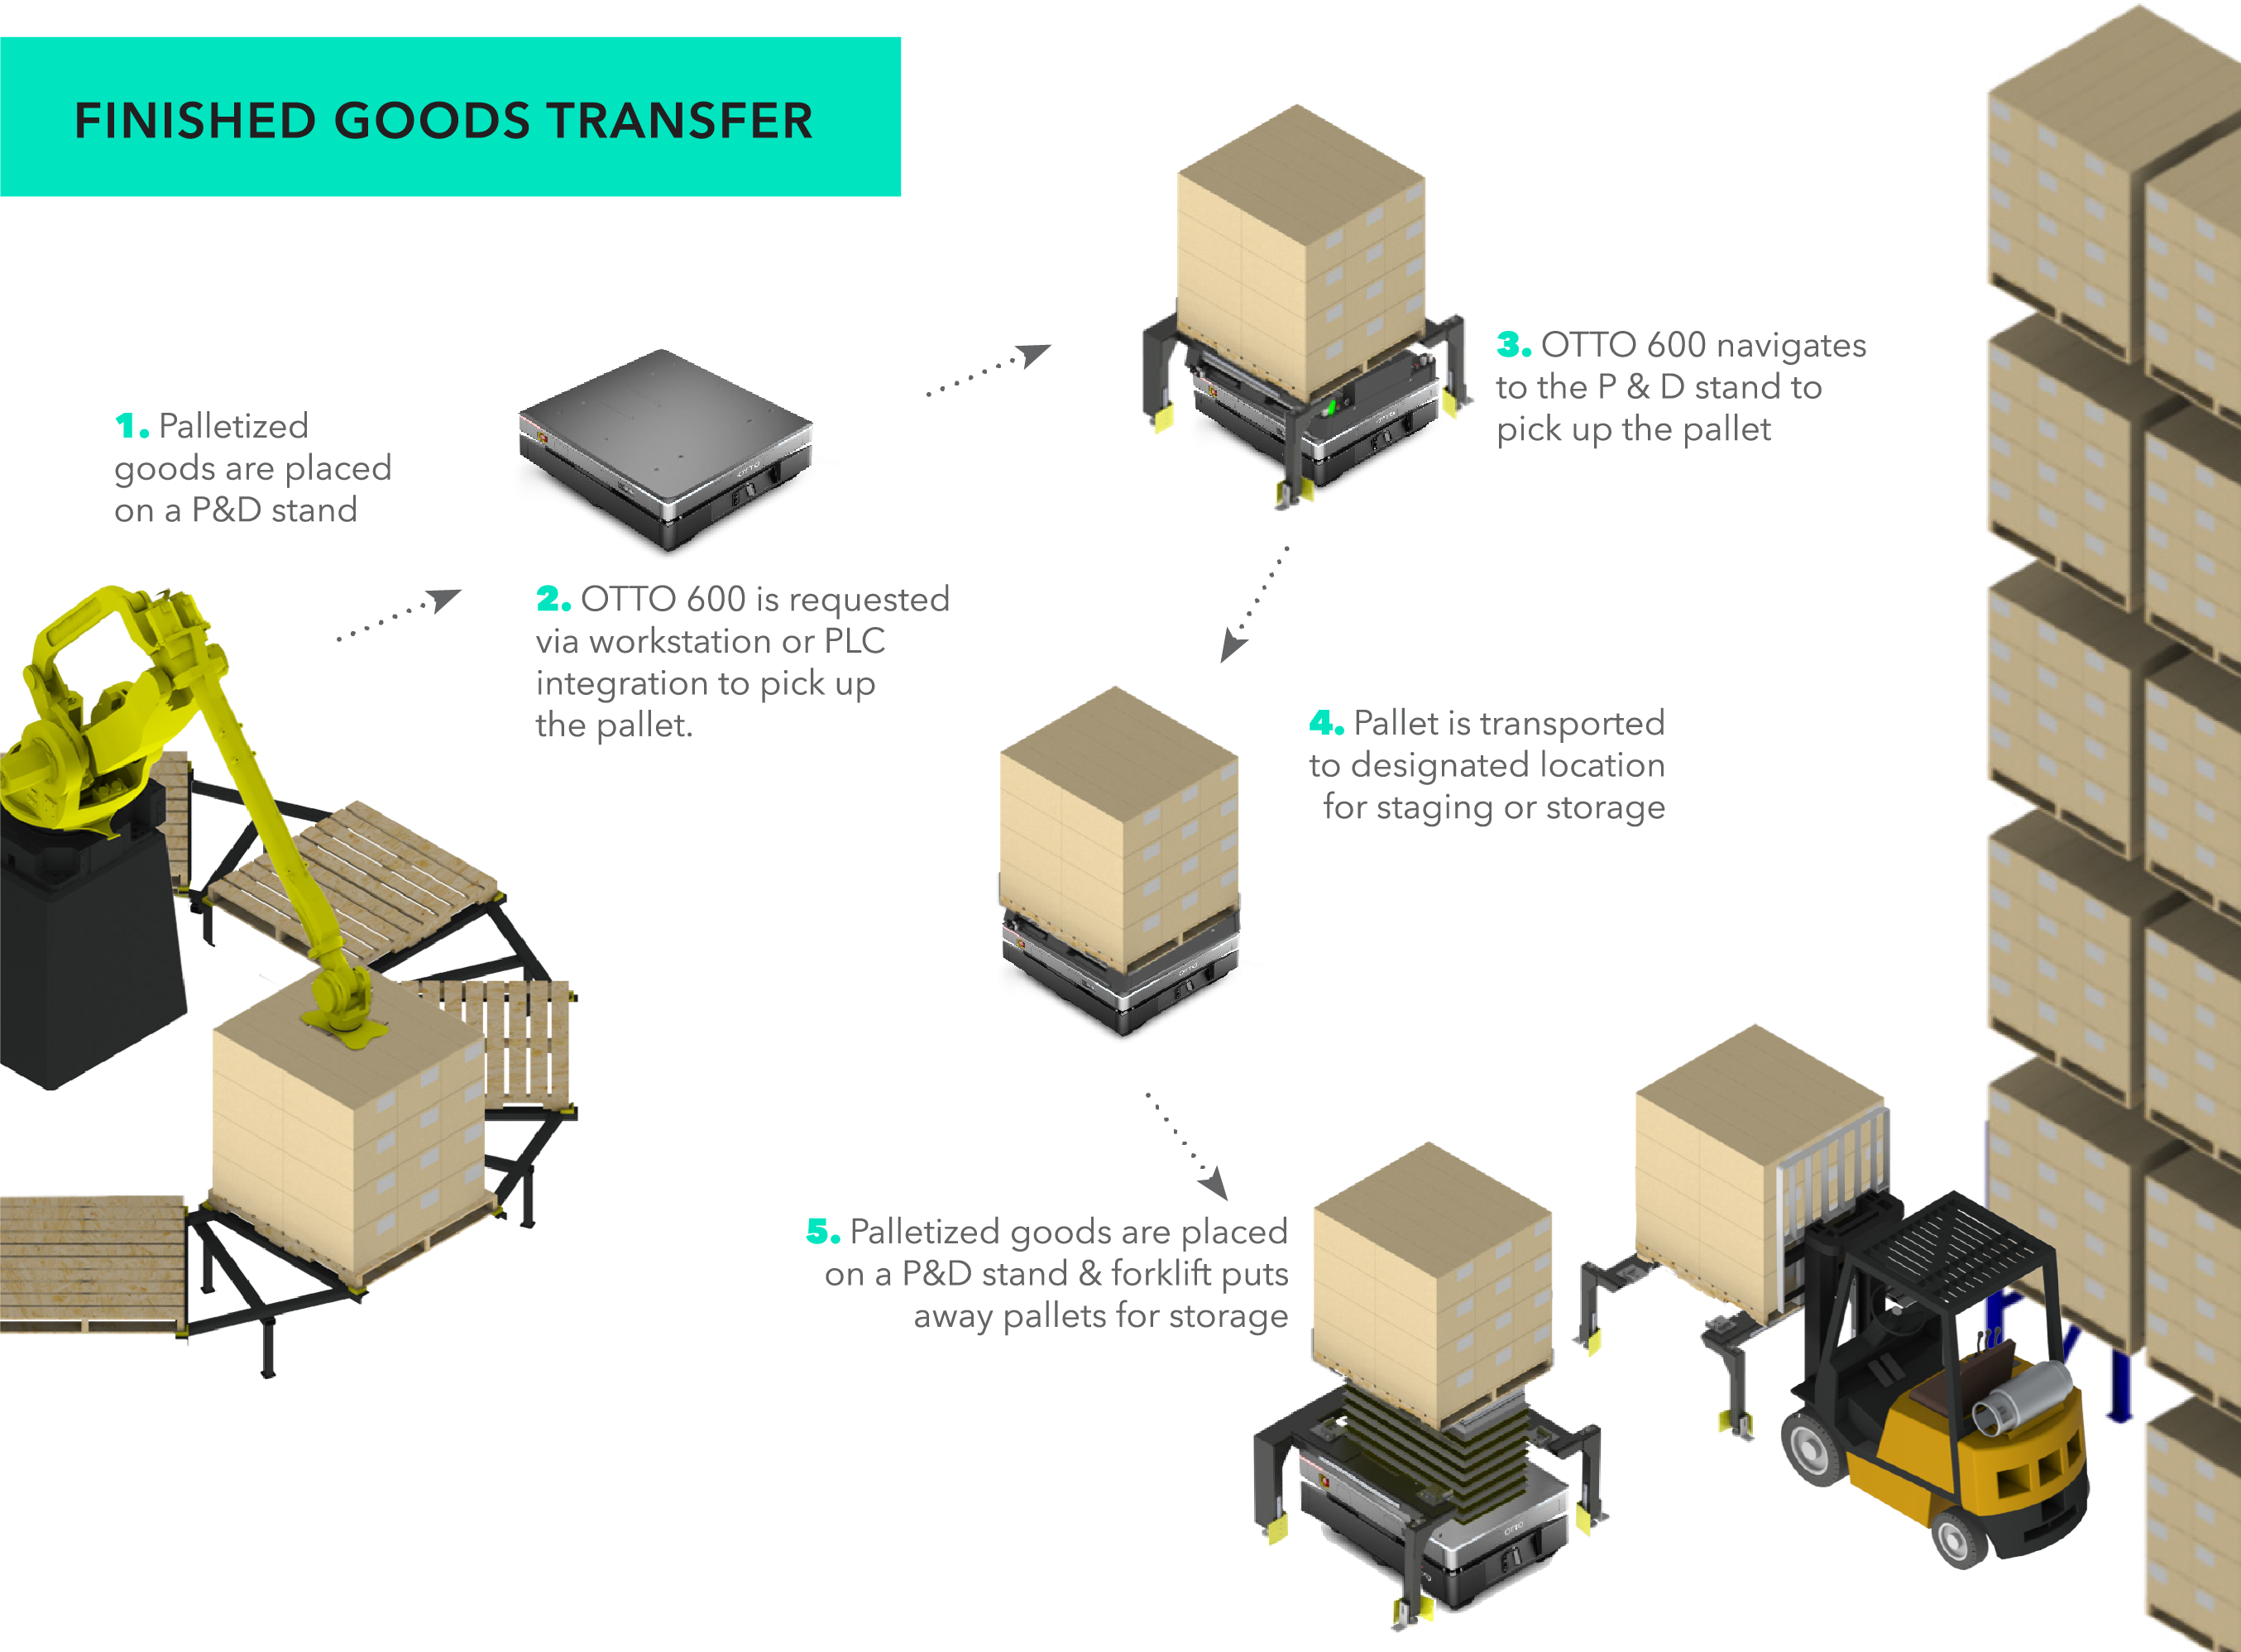 Image 1: OTTO 600 can automate the finished good transfer workflow.